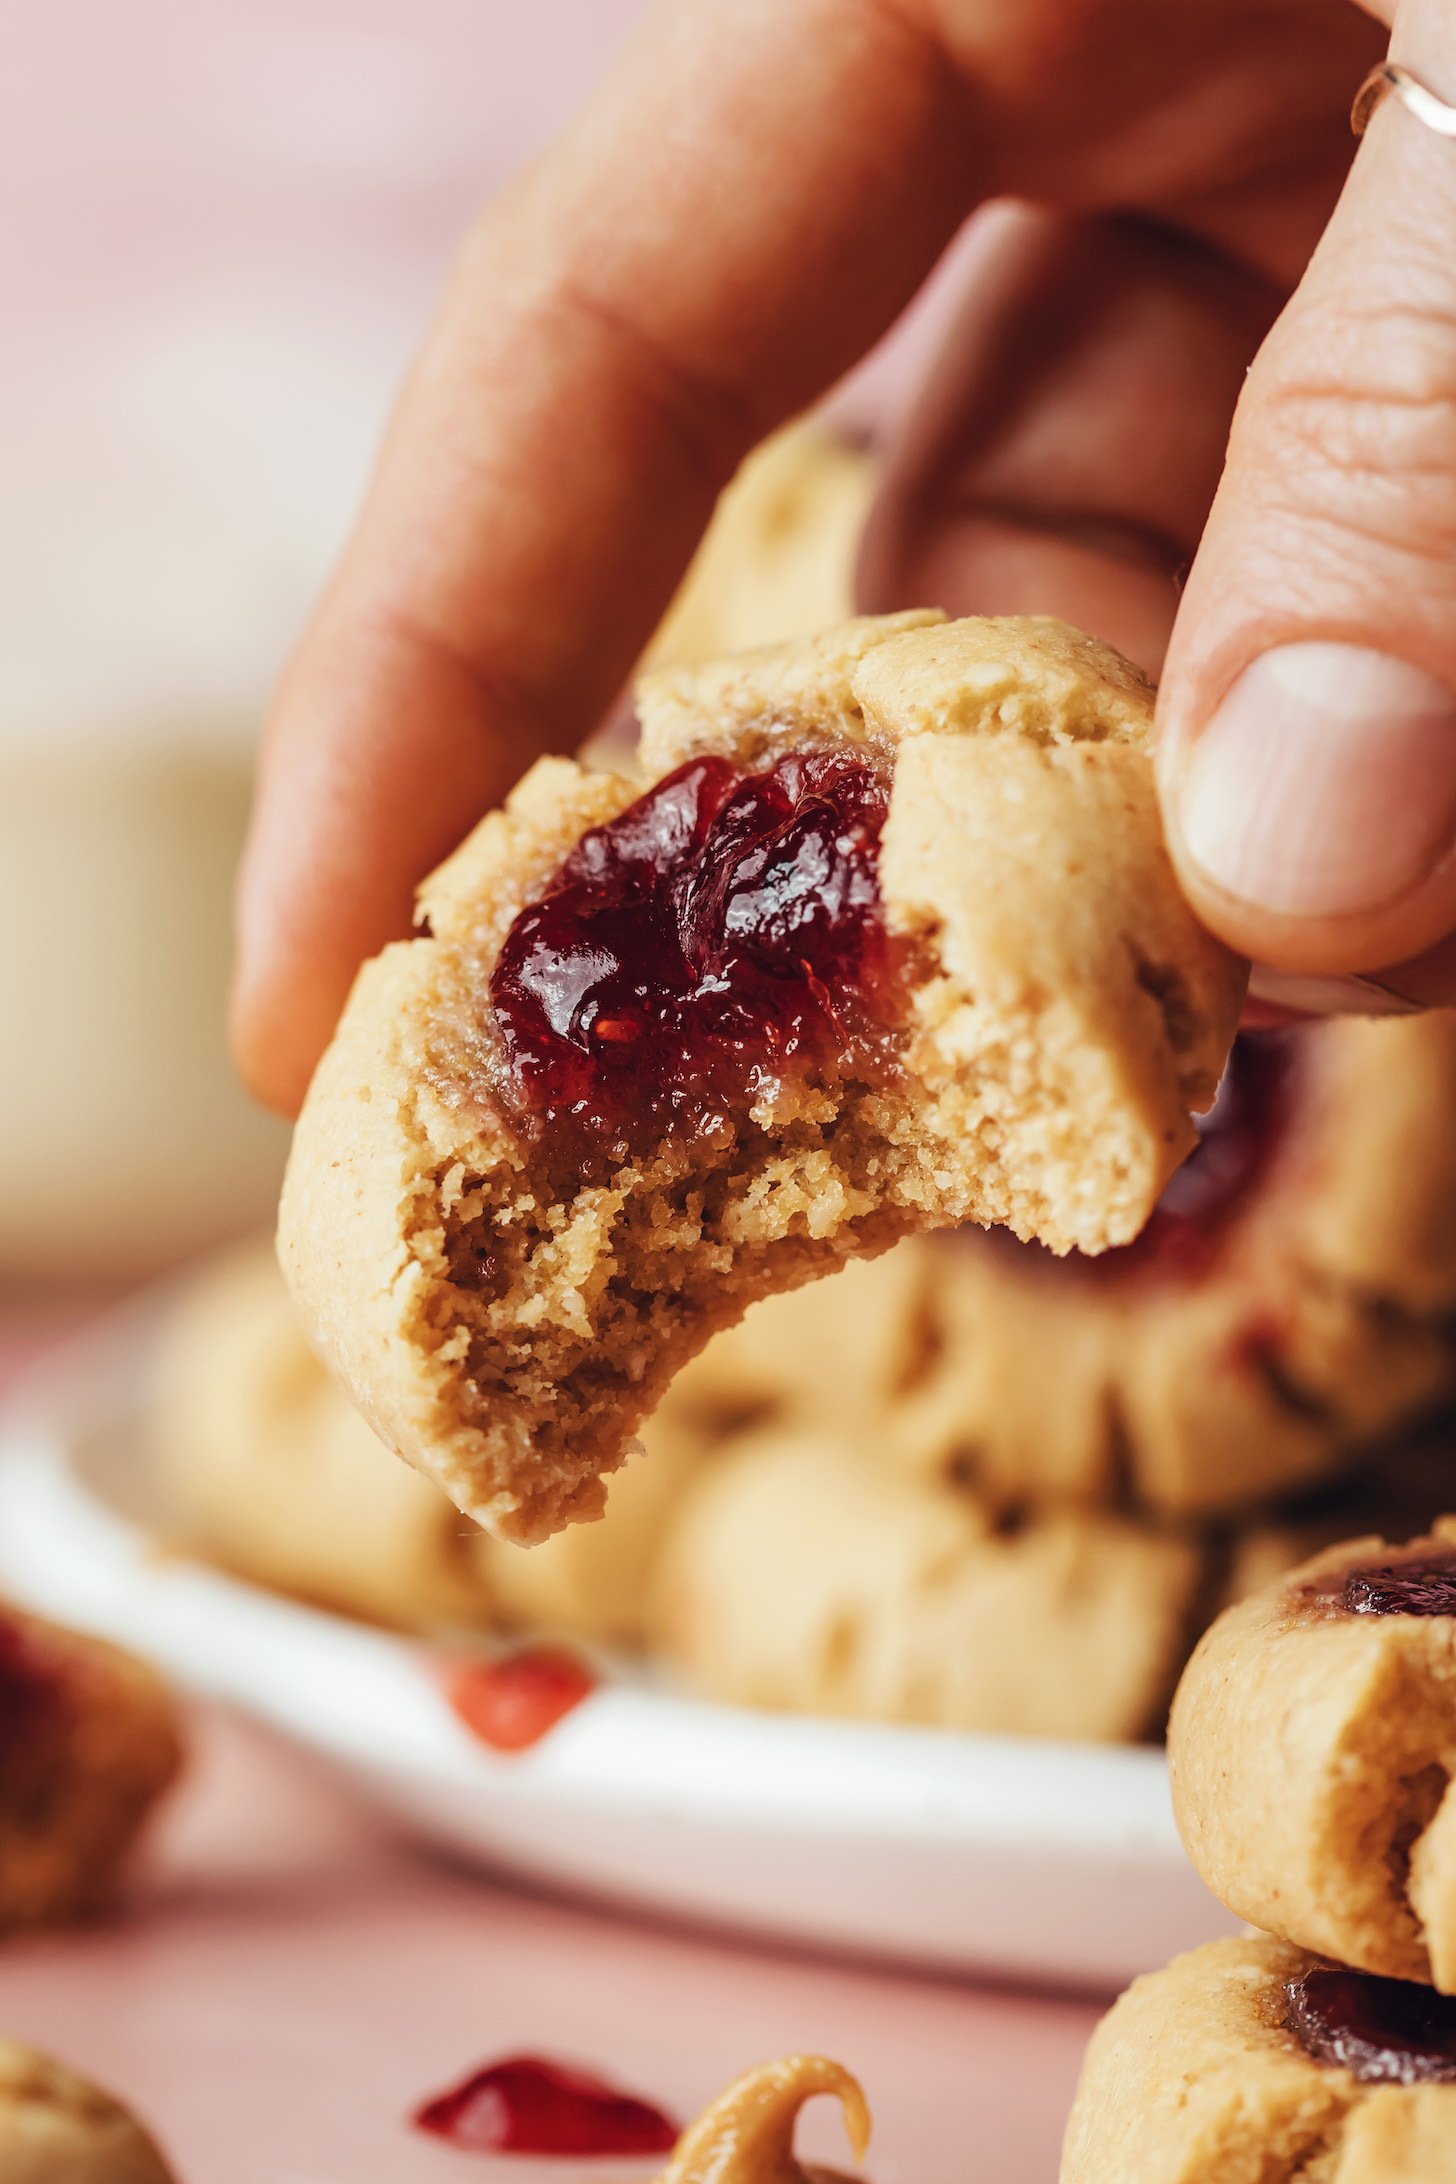 Holding up a partially eaten thumbprint cookie to reveal a soft, jam-filled center